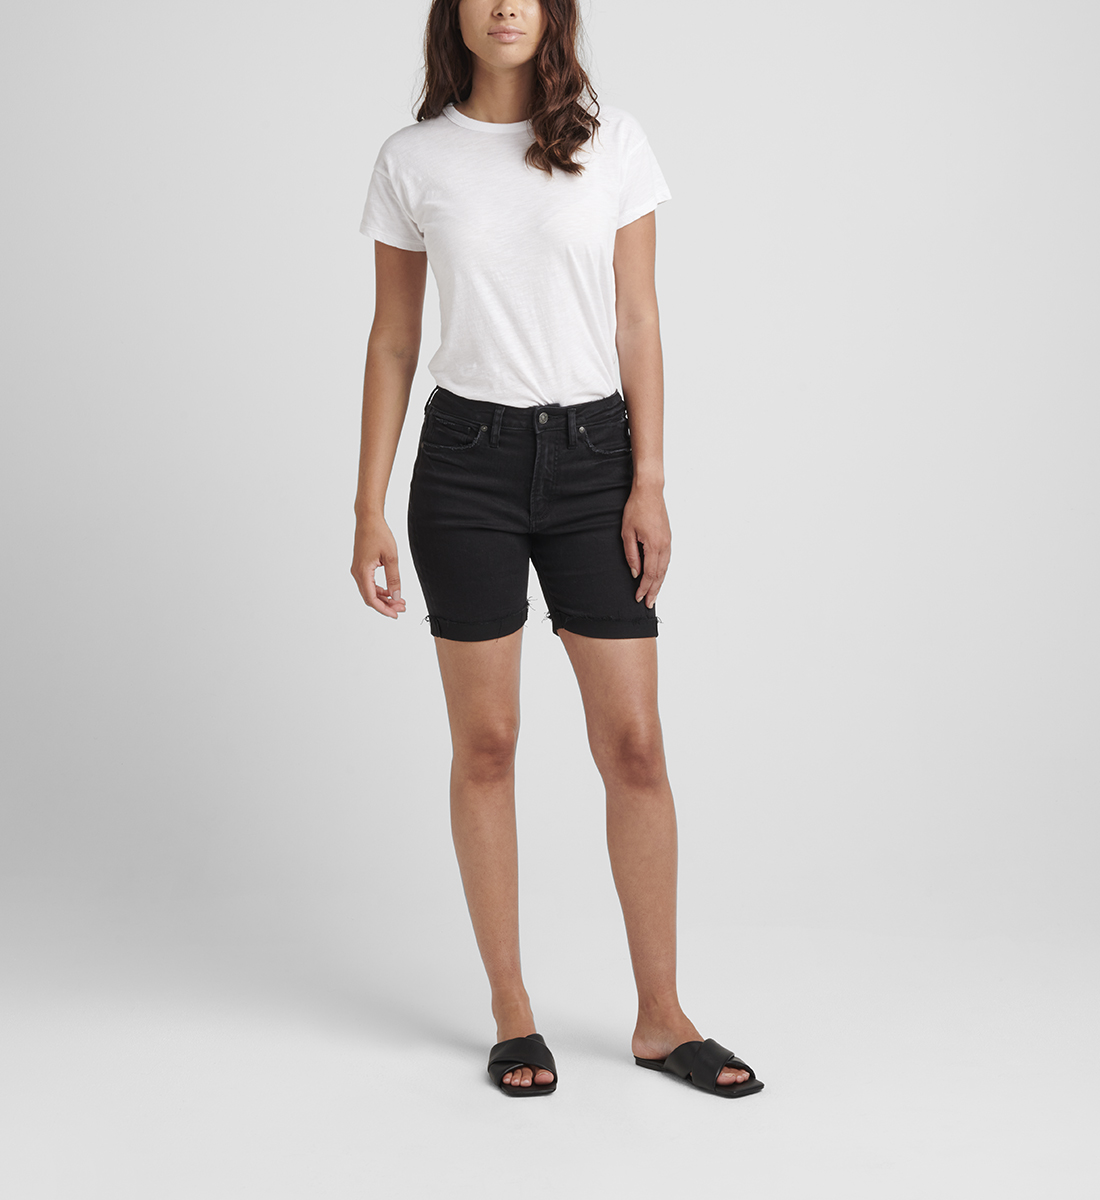 Silver Jeans Sure Thing High Rise Long Short